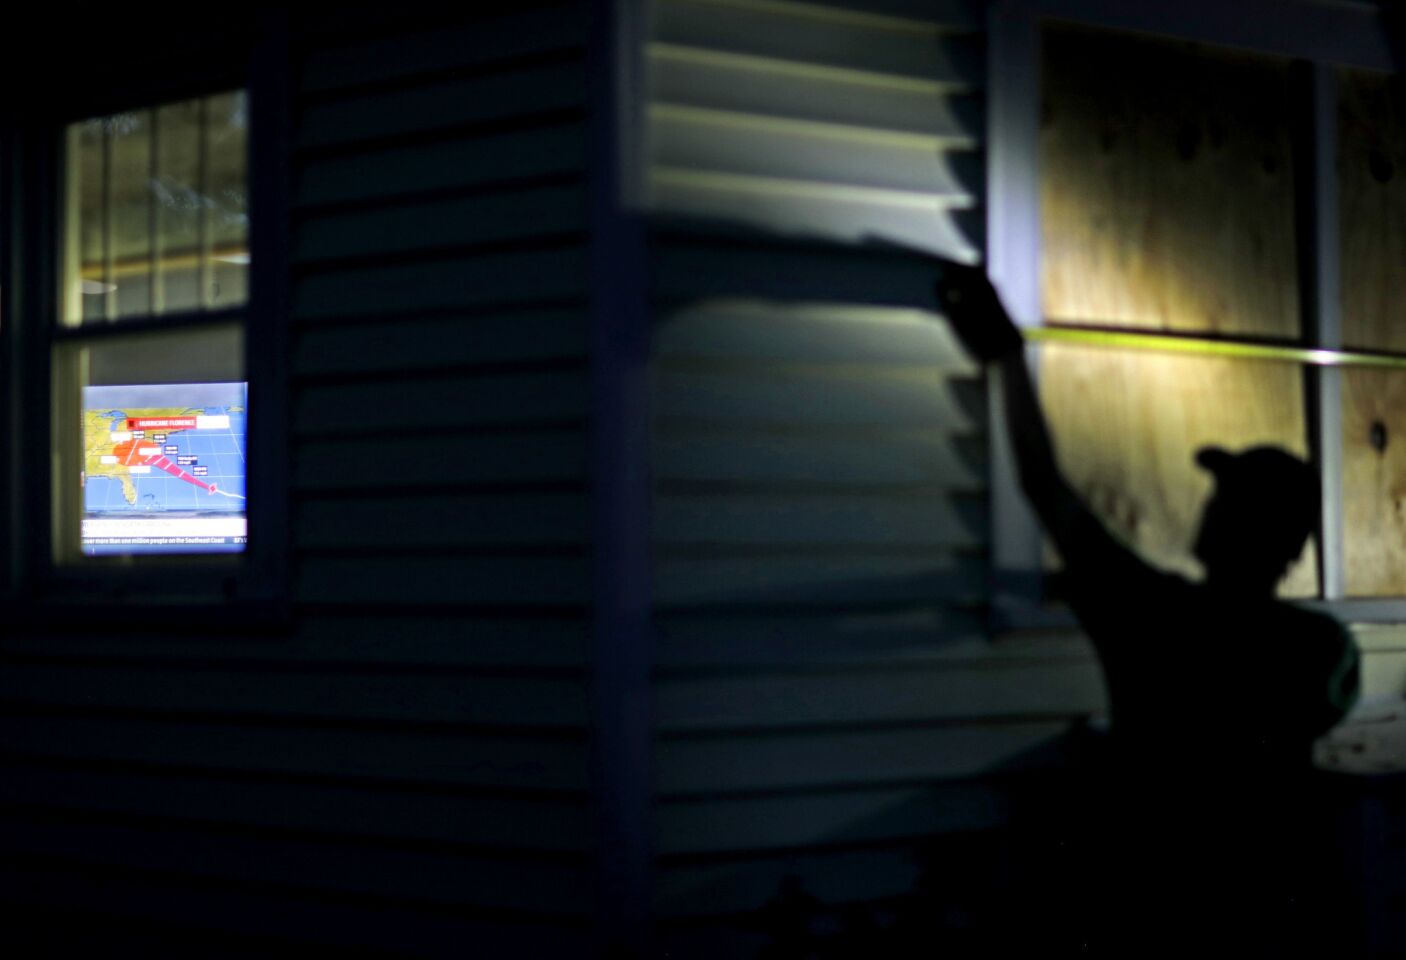 Russell Meadows boards up his neighbors home as a projection of Hurricane Florence is broadcast on a television inside in Morehead City, N.C., Tuesday, Sept. 11, 2018. Florence exploded into a potentially catastrophic hurricane Monday as it closed in on North and South Carolina, carrying winds up to 140 mph (220 kph) and water that could wreak havoc over a wide stretch of the eastern United States later this week.